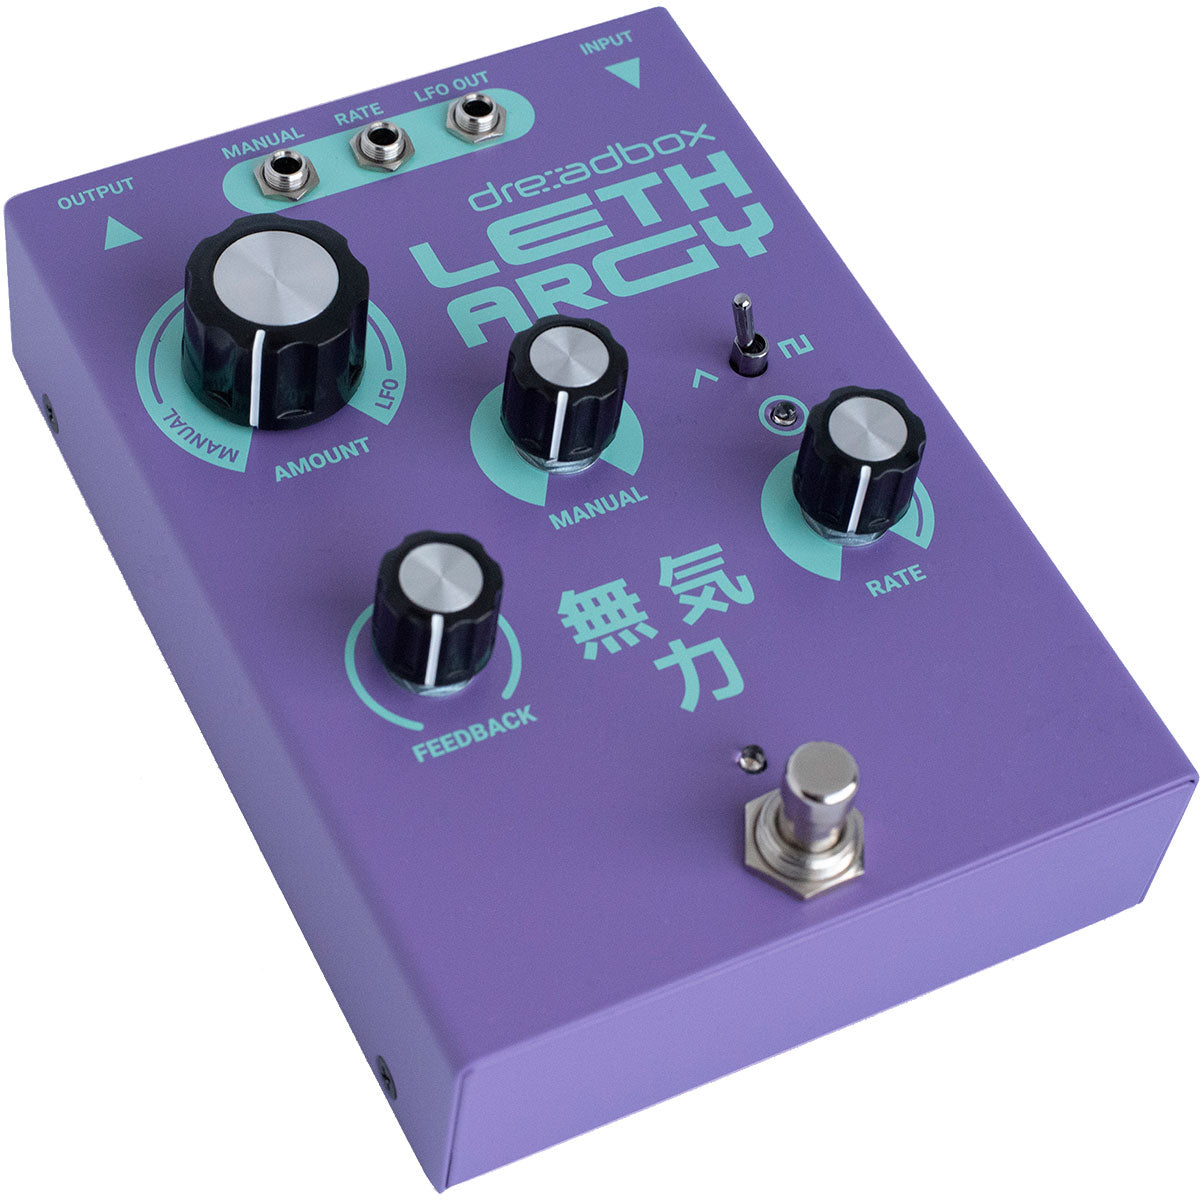 3/4 view of Dreadbox Lethargy 8-Stage OTA Phaser Effects Pedal showing top, front and left side